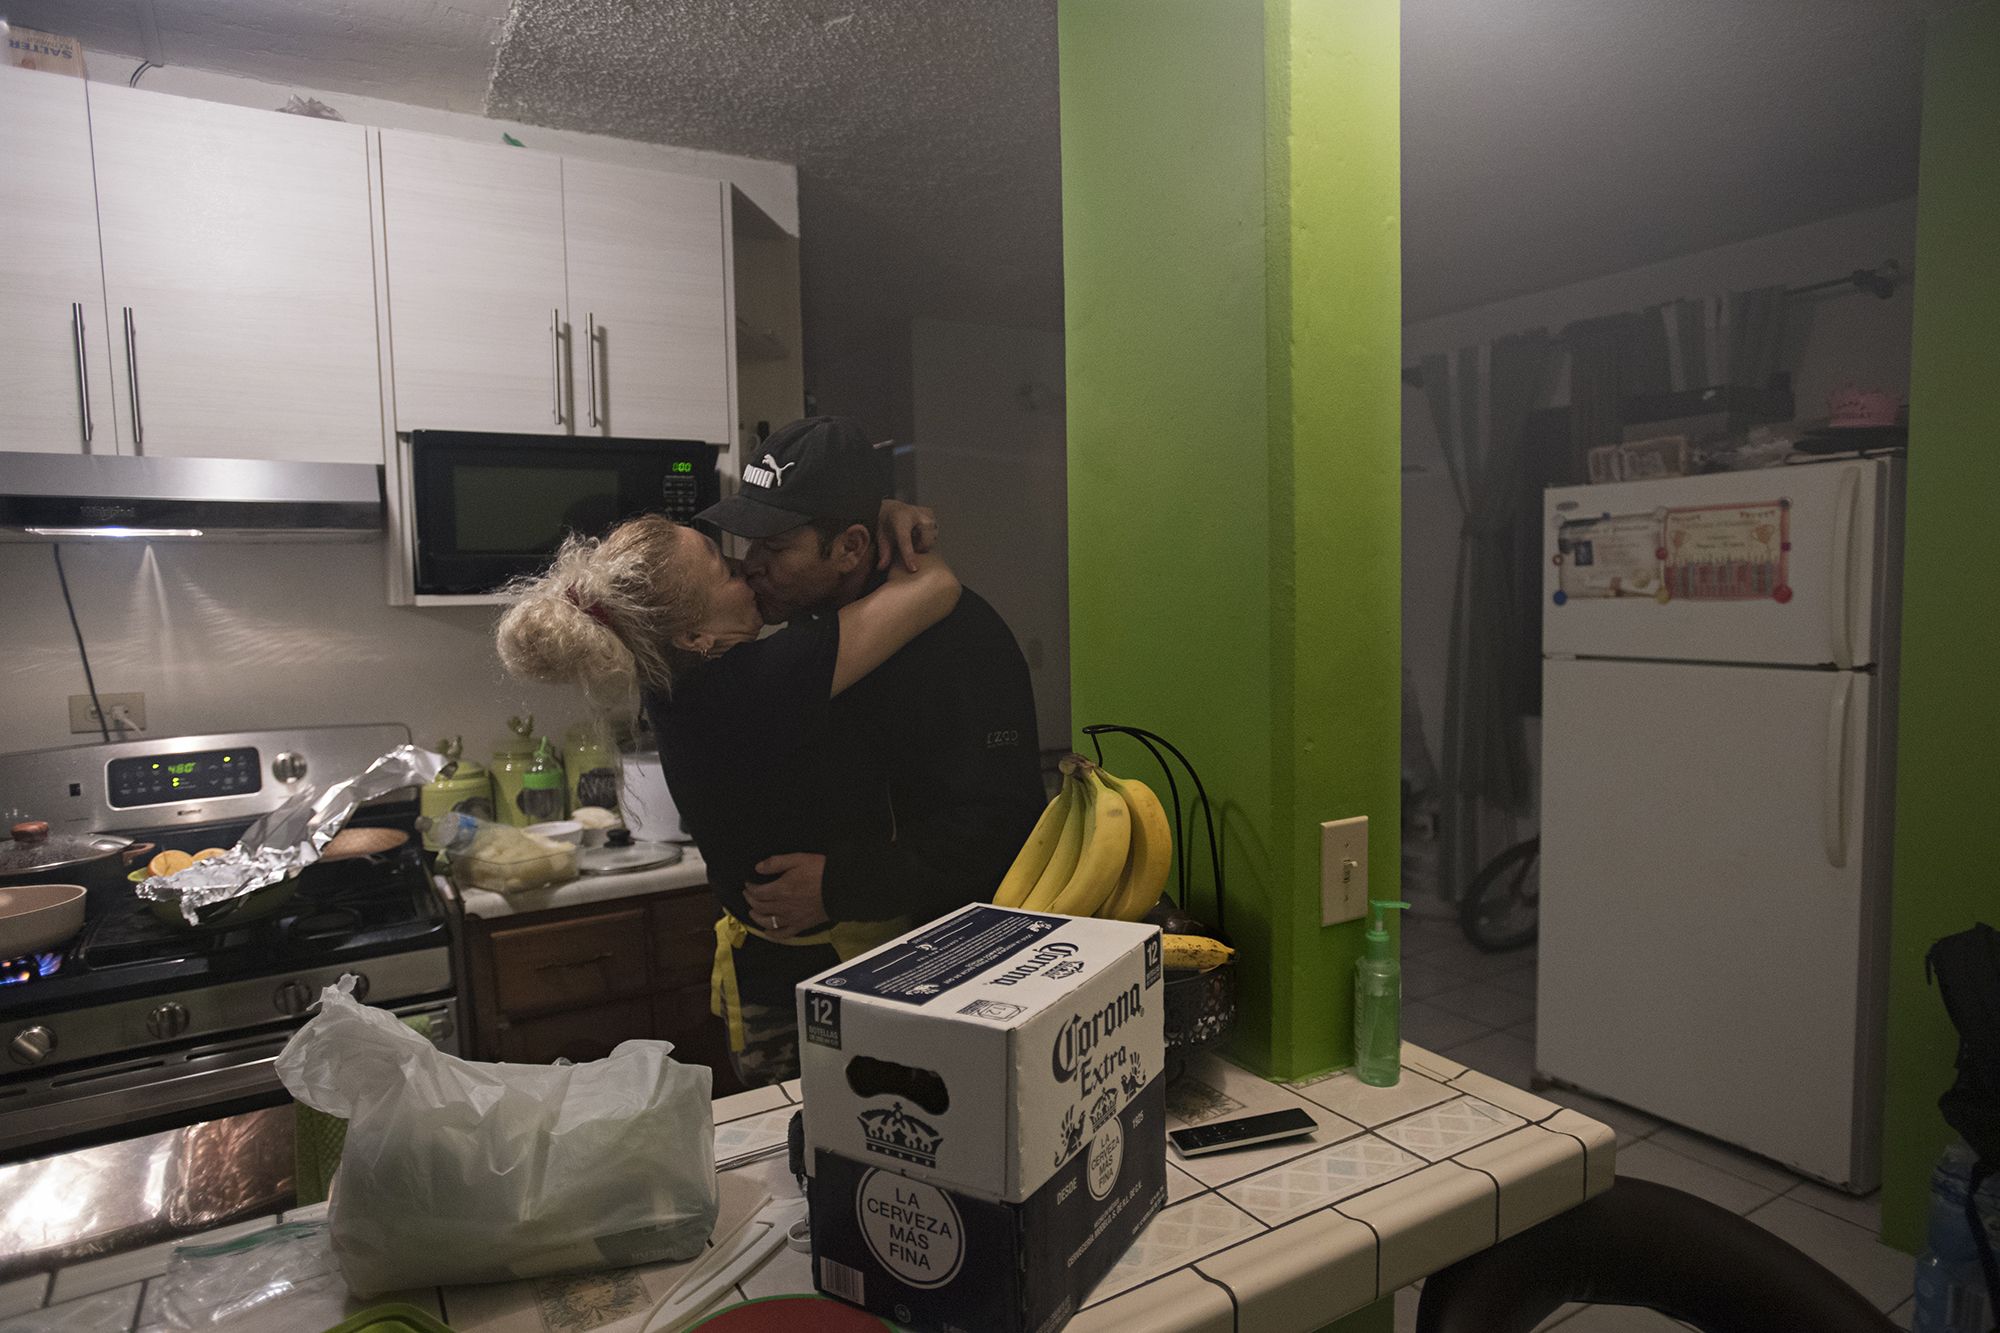 Enedis Flores welcomes home her husband, Ramon, from work as she cooks Thanksgiving dinner at his apartment in Tijuana, Mexico. Ramon, who works as a carpenter, built custom cabinets and painted the walls of the apartment to make it feel more like home for his family. Image by Amanda Cowan. Mexico, 2019.